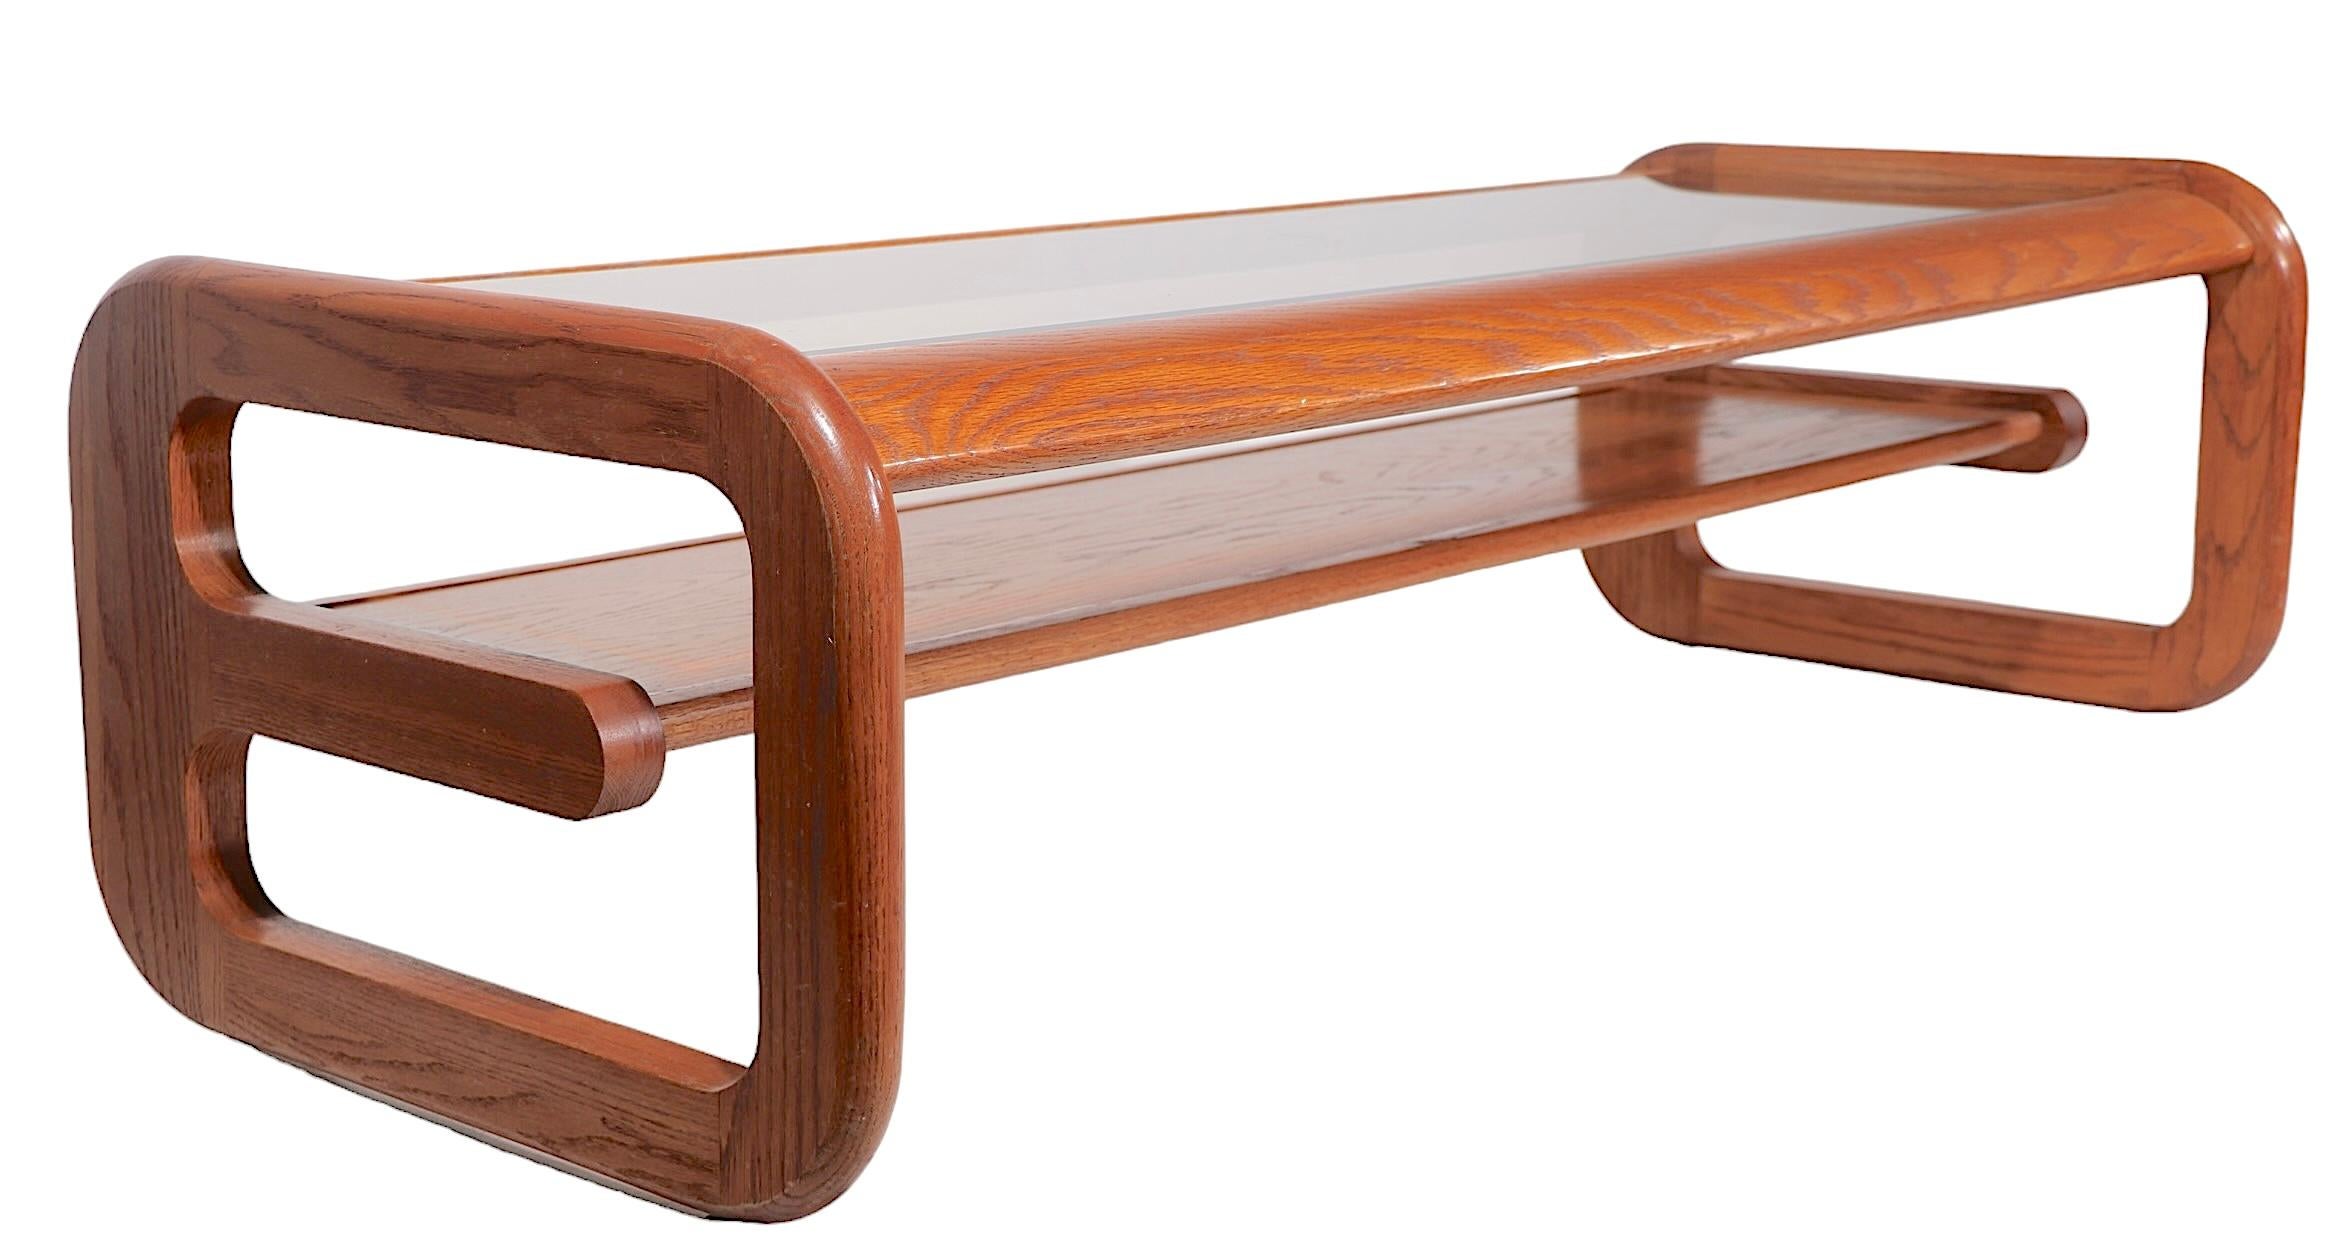  Post Modern Oak and Glass Coffee Table by Lou Hodges for Mersman  c. 1970's For Sale 3